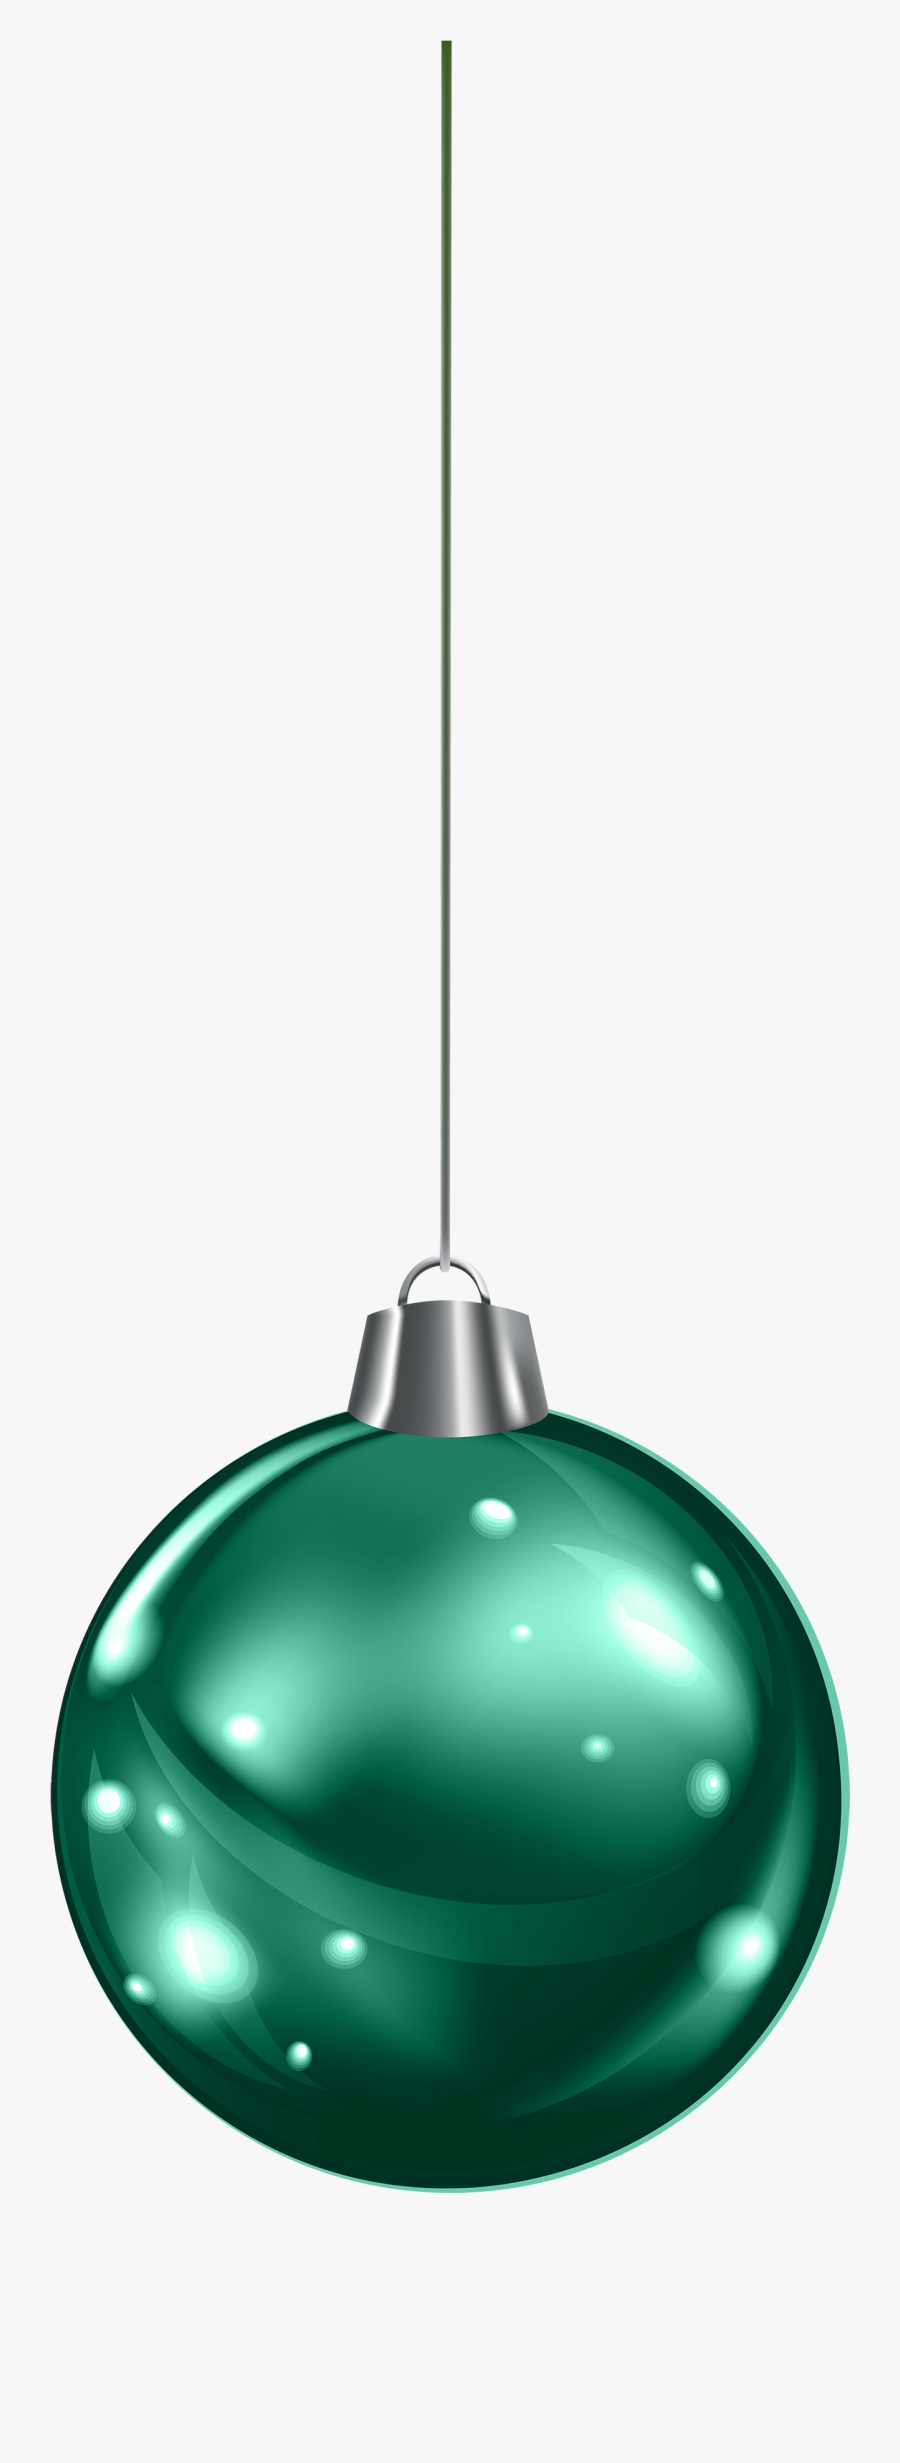 Hanging Green Christmas Ball Png Clipart - Hanging Christmas Balls Transparent, Transparent Clipart